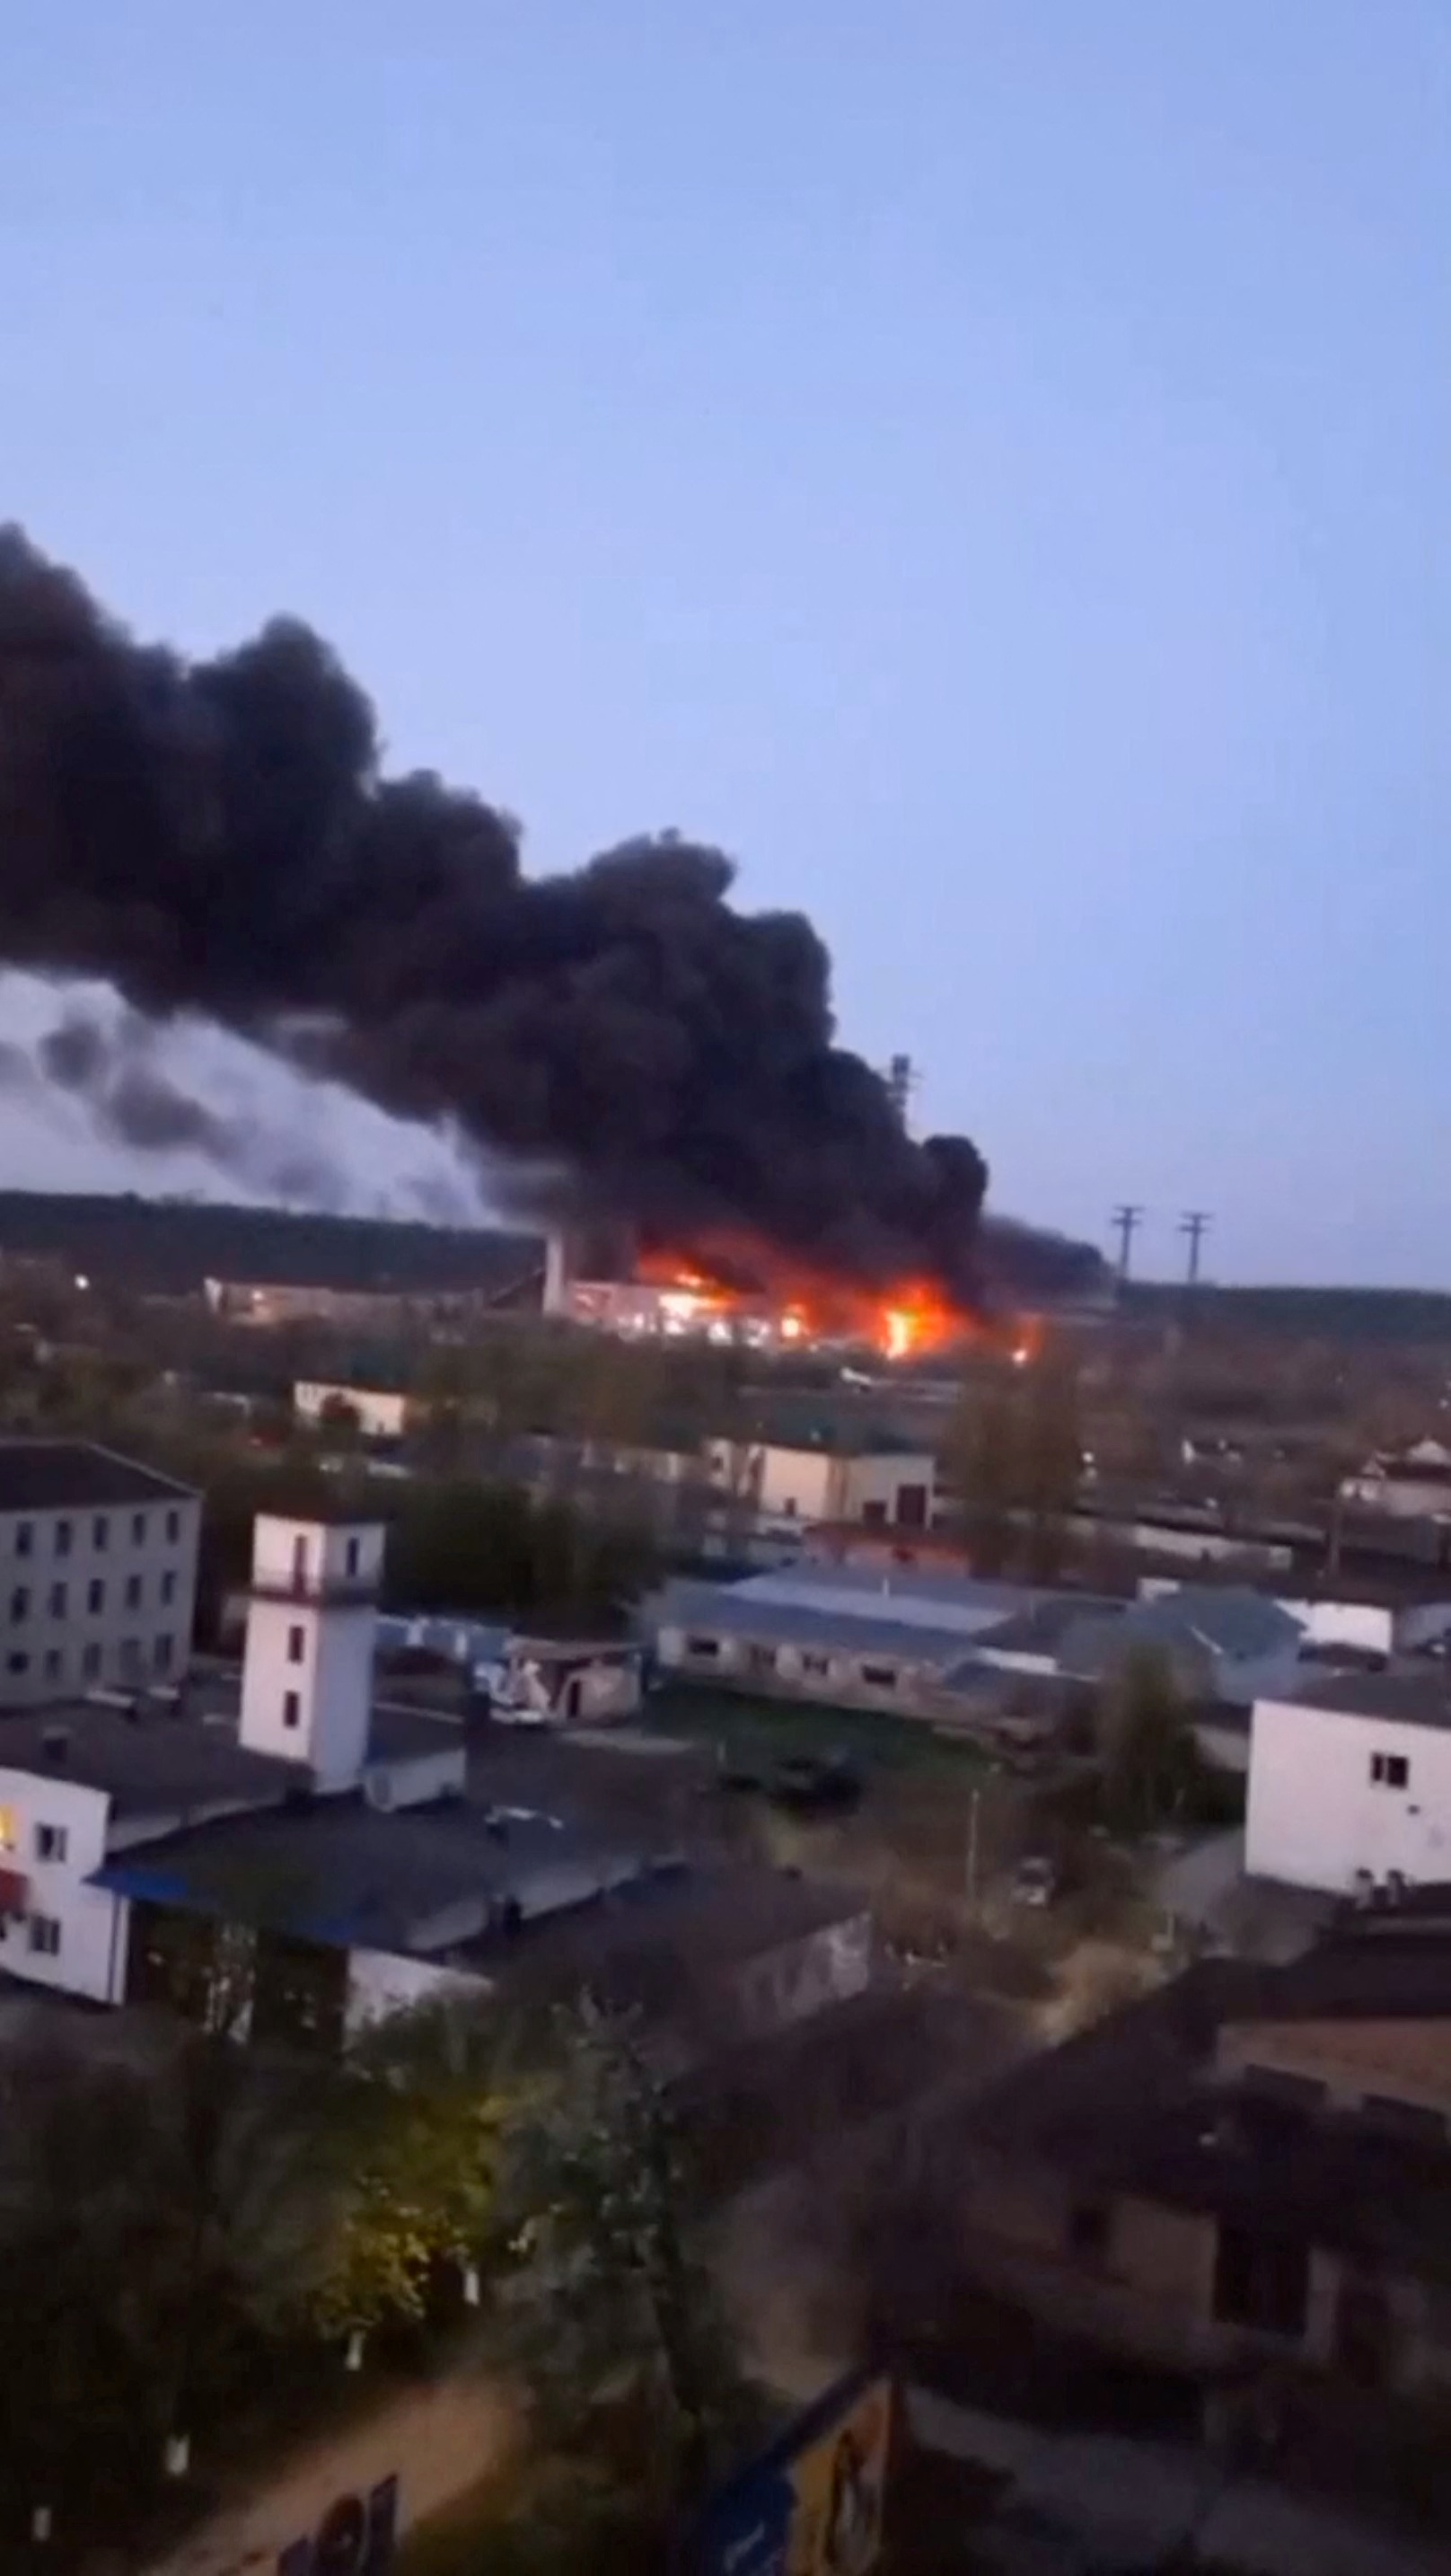 Smoke and fire rise from the site of a missile strike at the Trypilska power station in Kyiv region